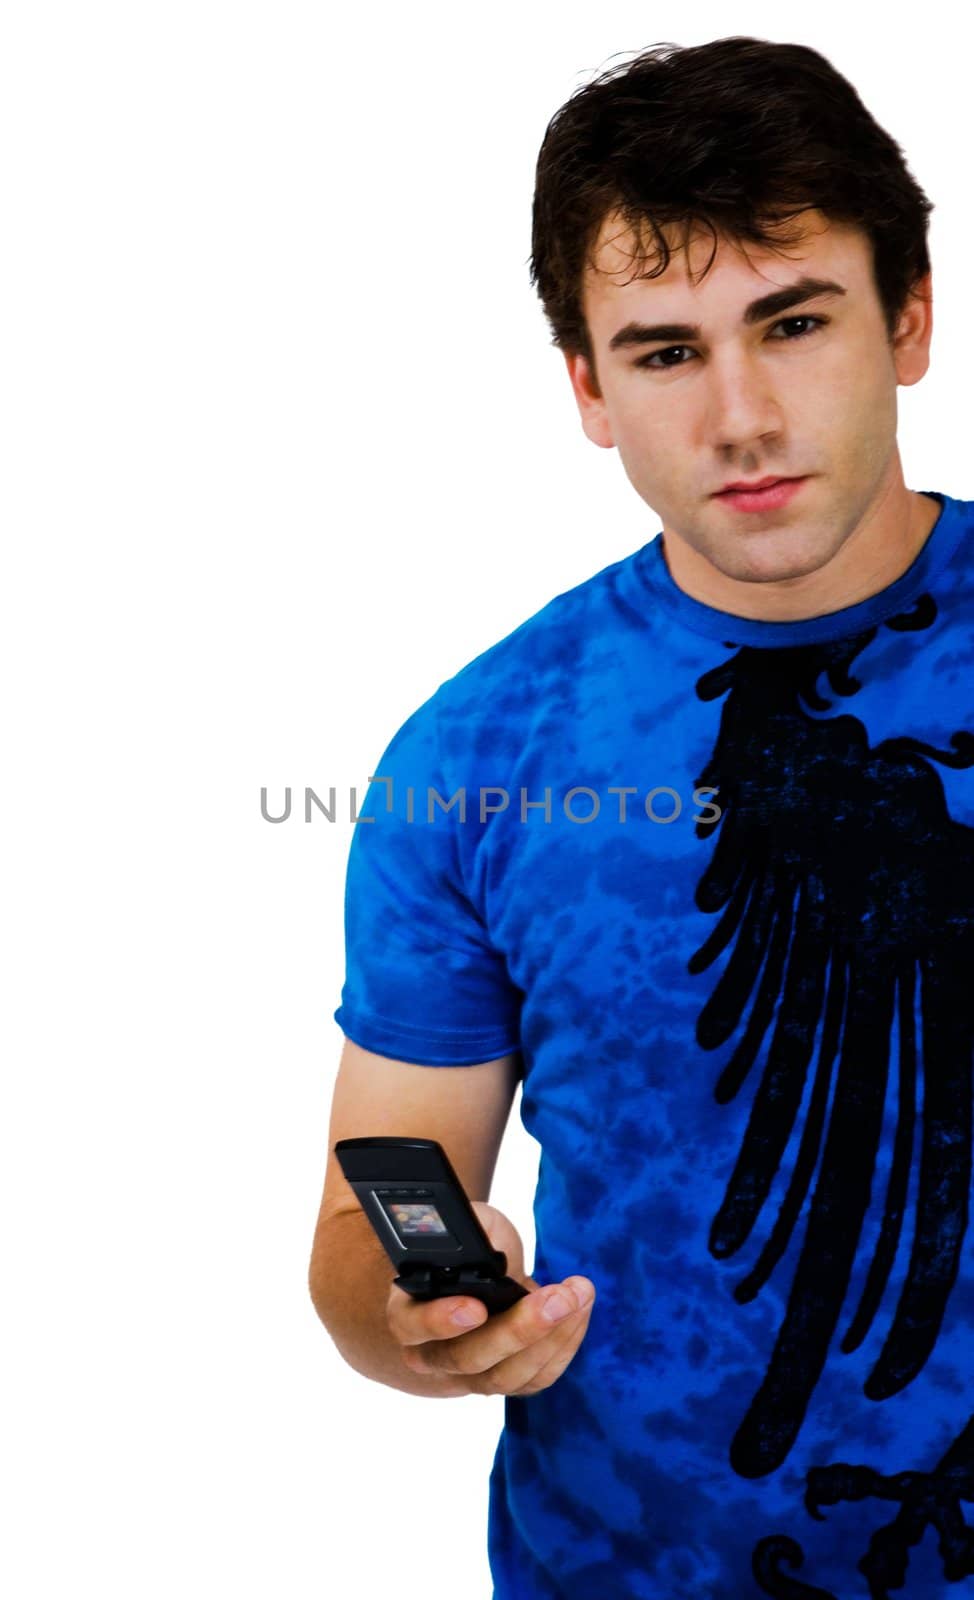 Portrait of a man text messaging on a mobile phone isolated over white